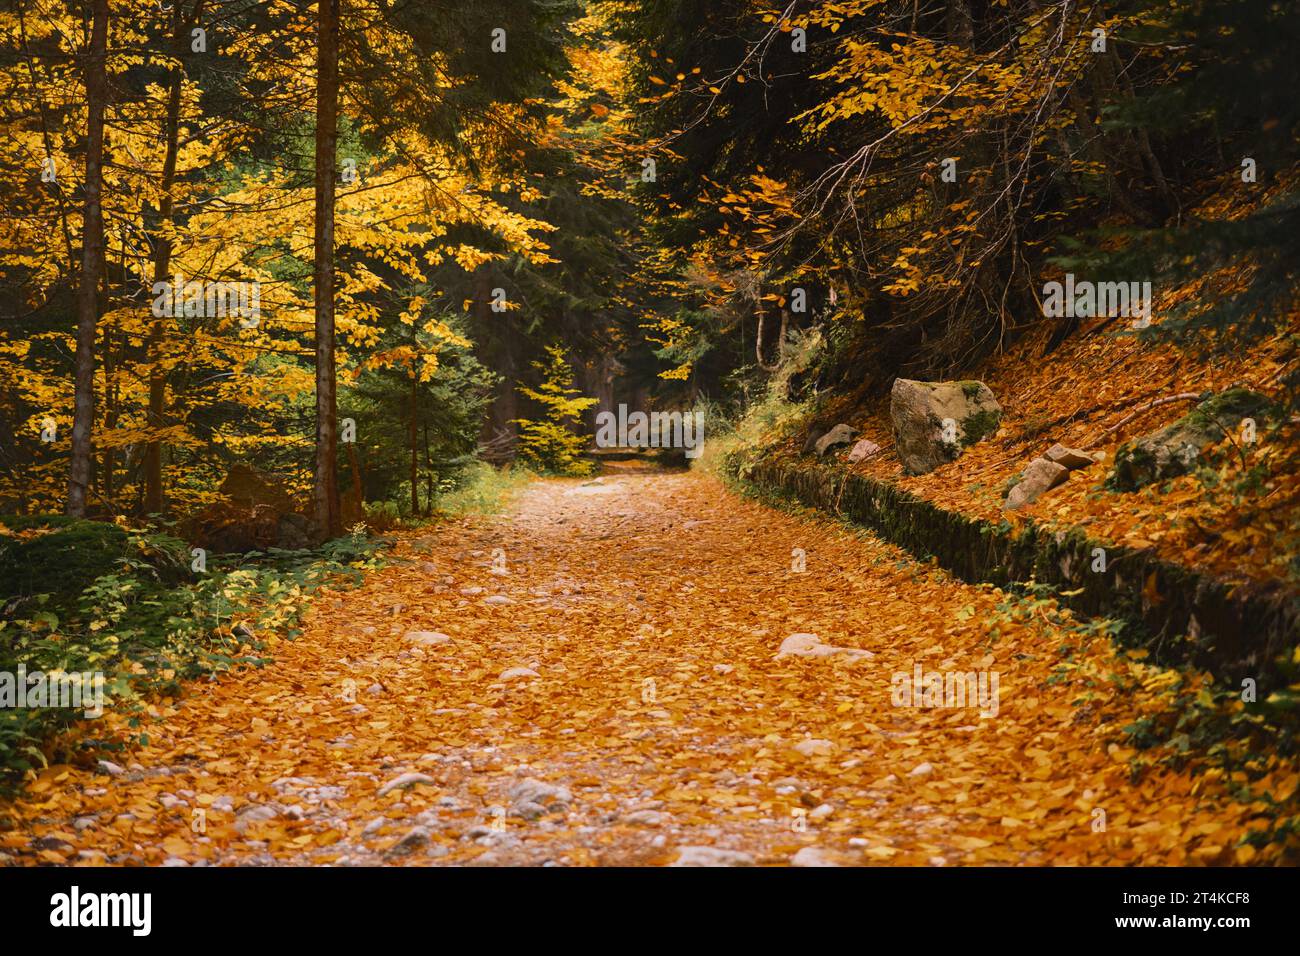 Road in autumn forest, bright beautiful orange leaves falling on the ground, forest bathing and admiring the autumn forest, diffused sunlight, shootin Stock Photo